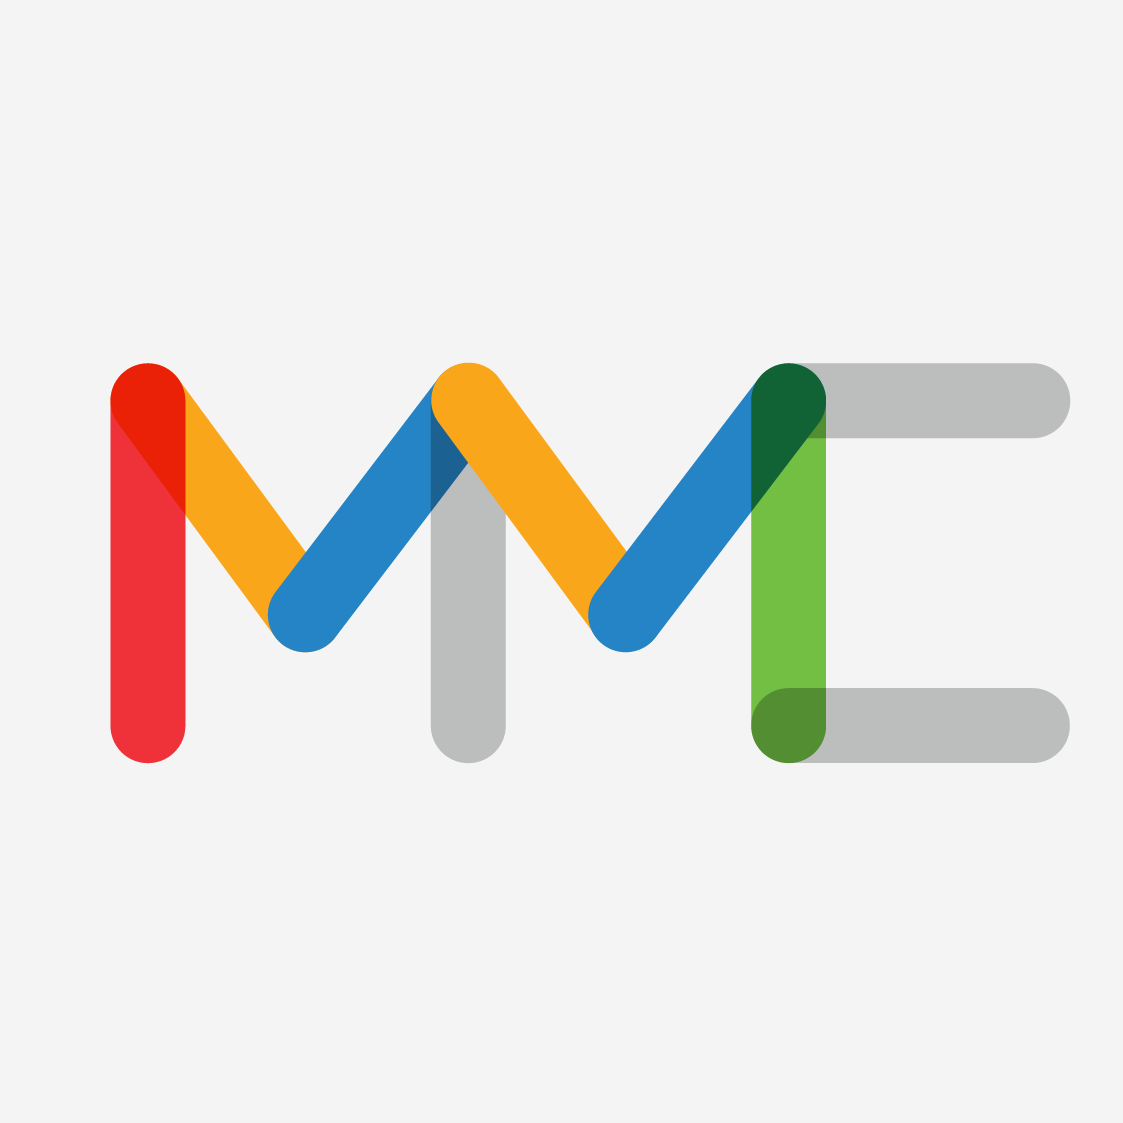 MMC are a digital, design, development and communications agency. We work with global teams and organisations to create positive change, through digital.